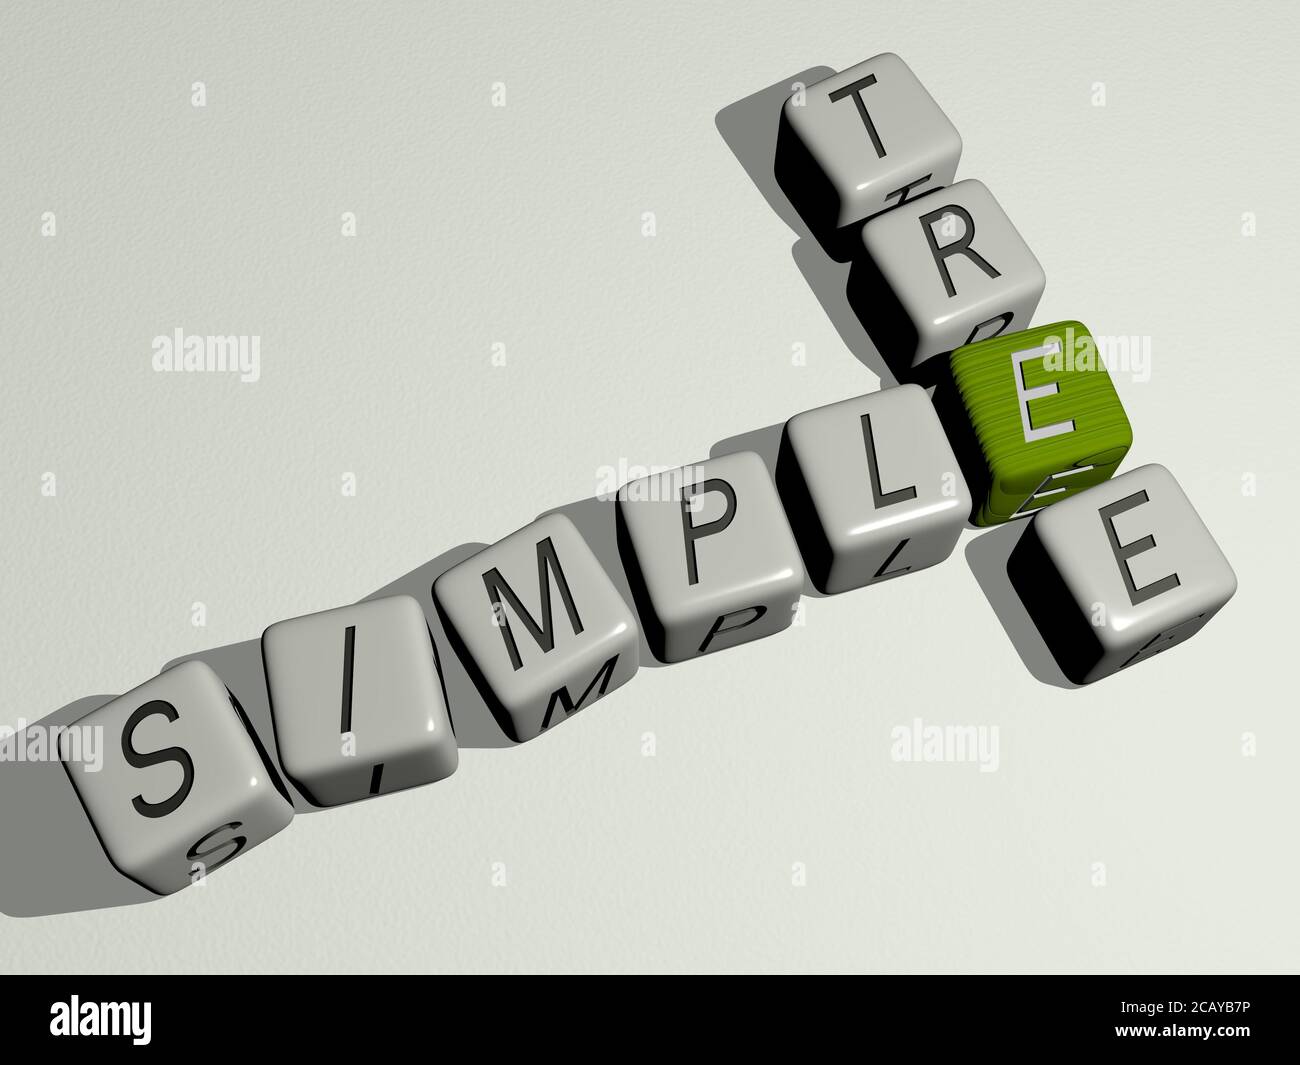 SIMPLE TREE crossword by cubic dice letters. 3D illustration. icon and background Stock Photo